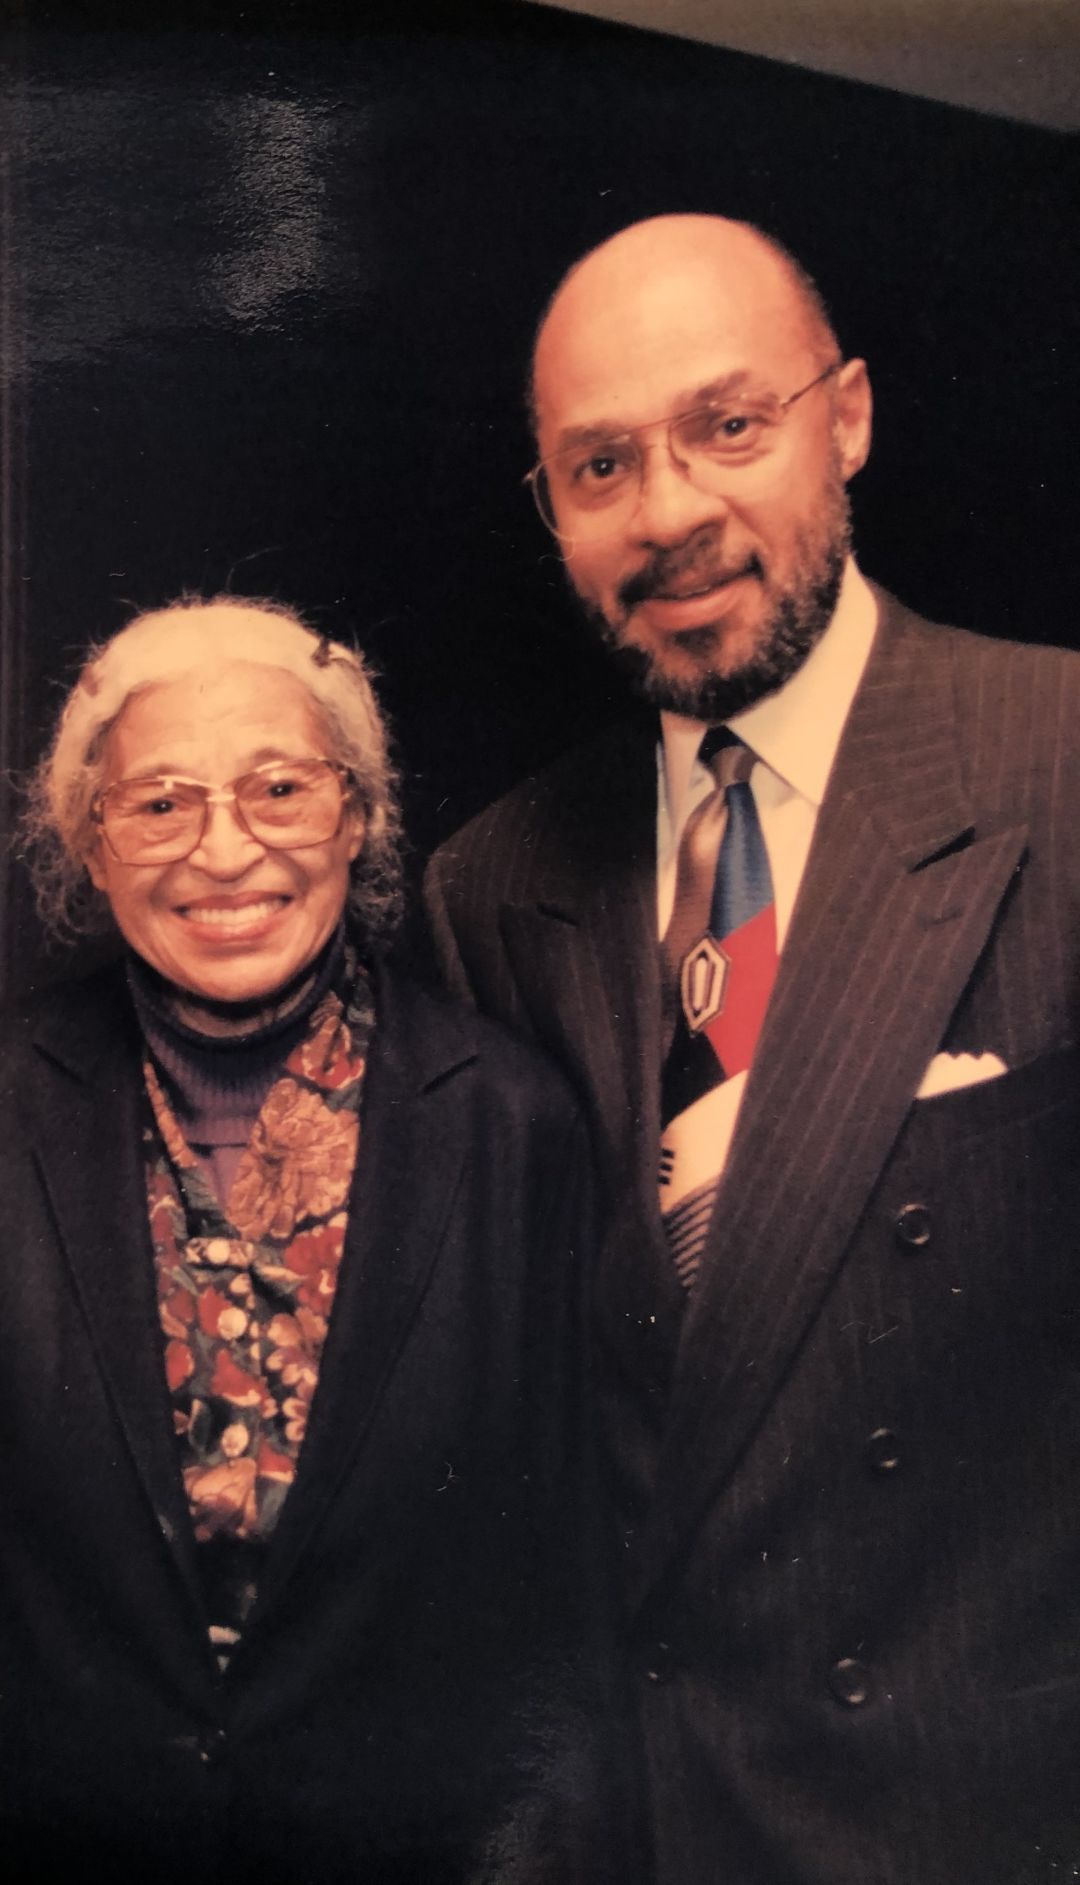 Dennis Archer with civil rights icon Rosa Parks. Archer was appointed Parks' legal guardian in 2004.